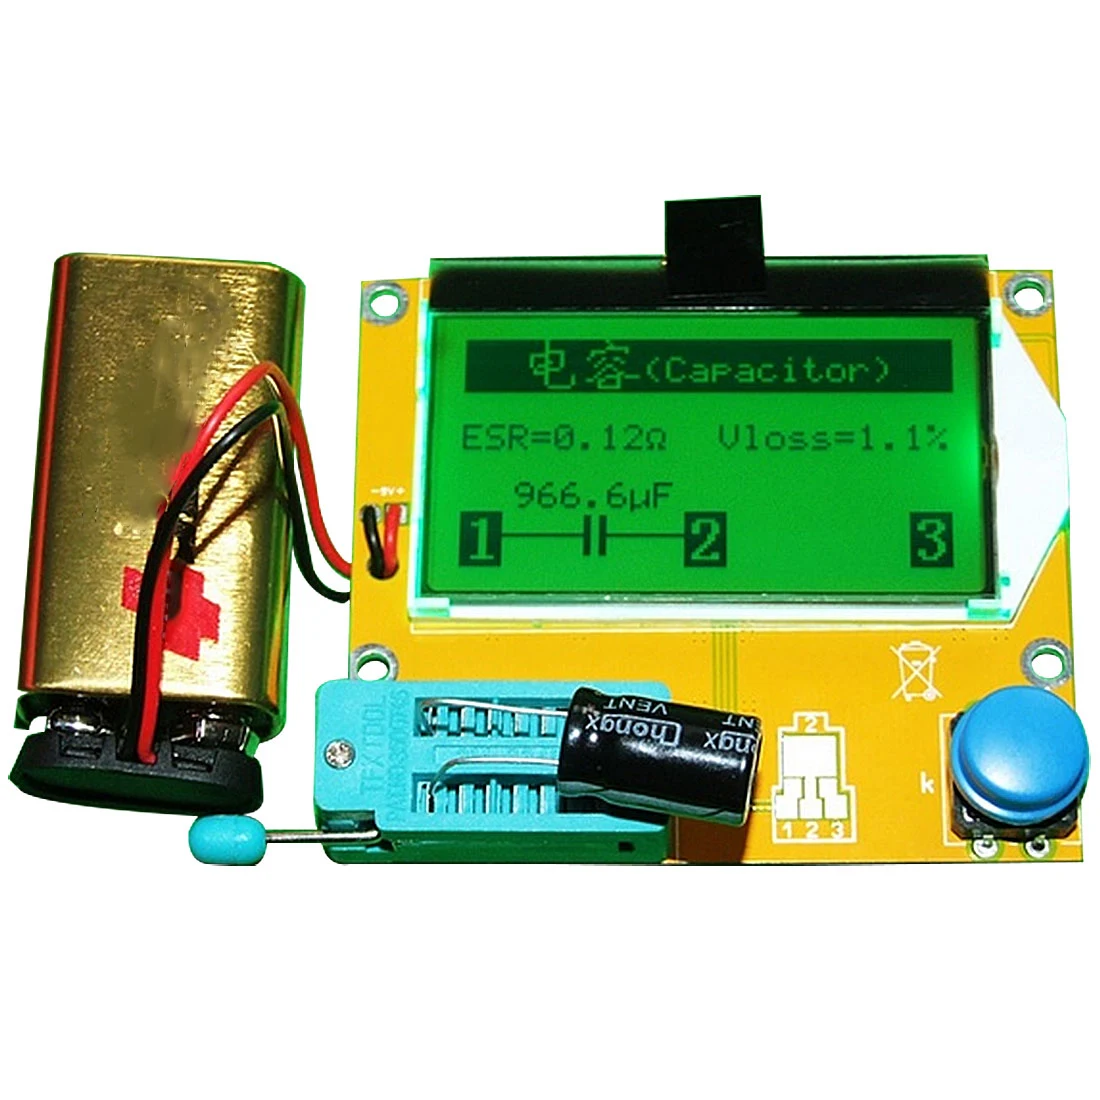 New All-in-1 Component Tester Transistor Diode Capacitor Resistor Inductor Meter 